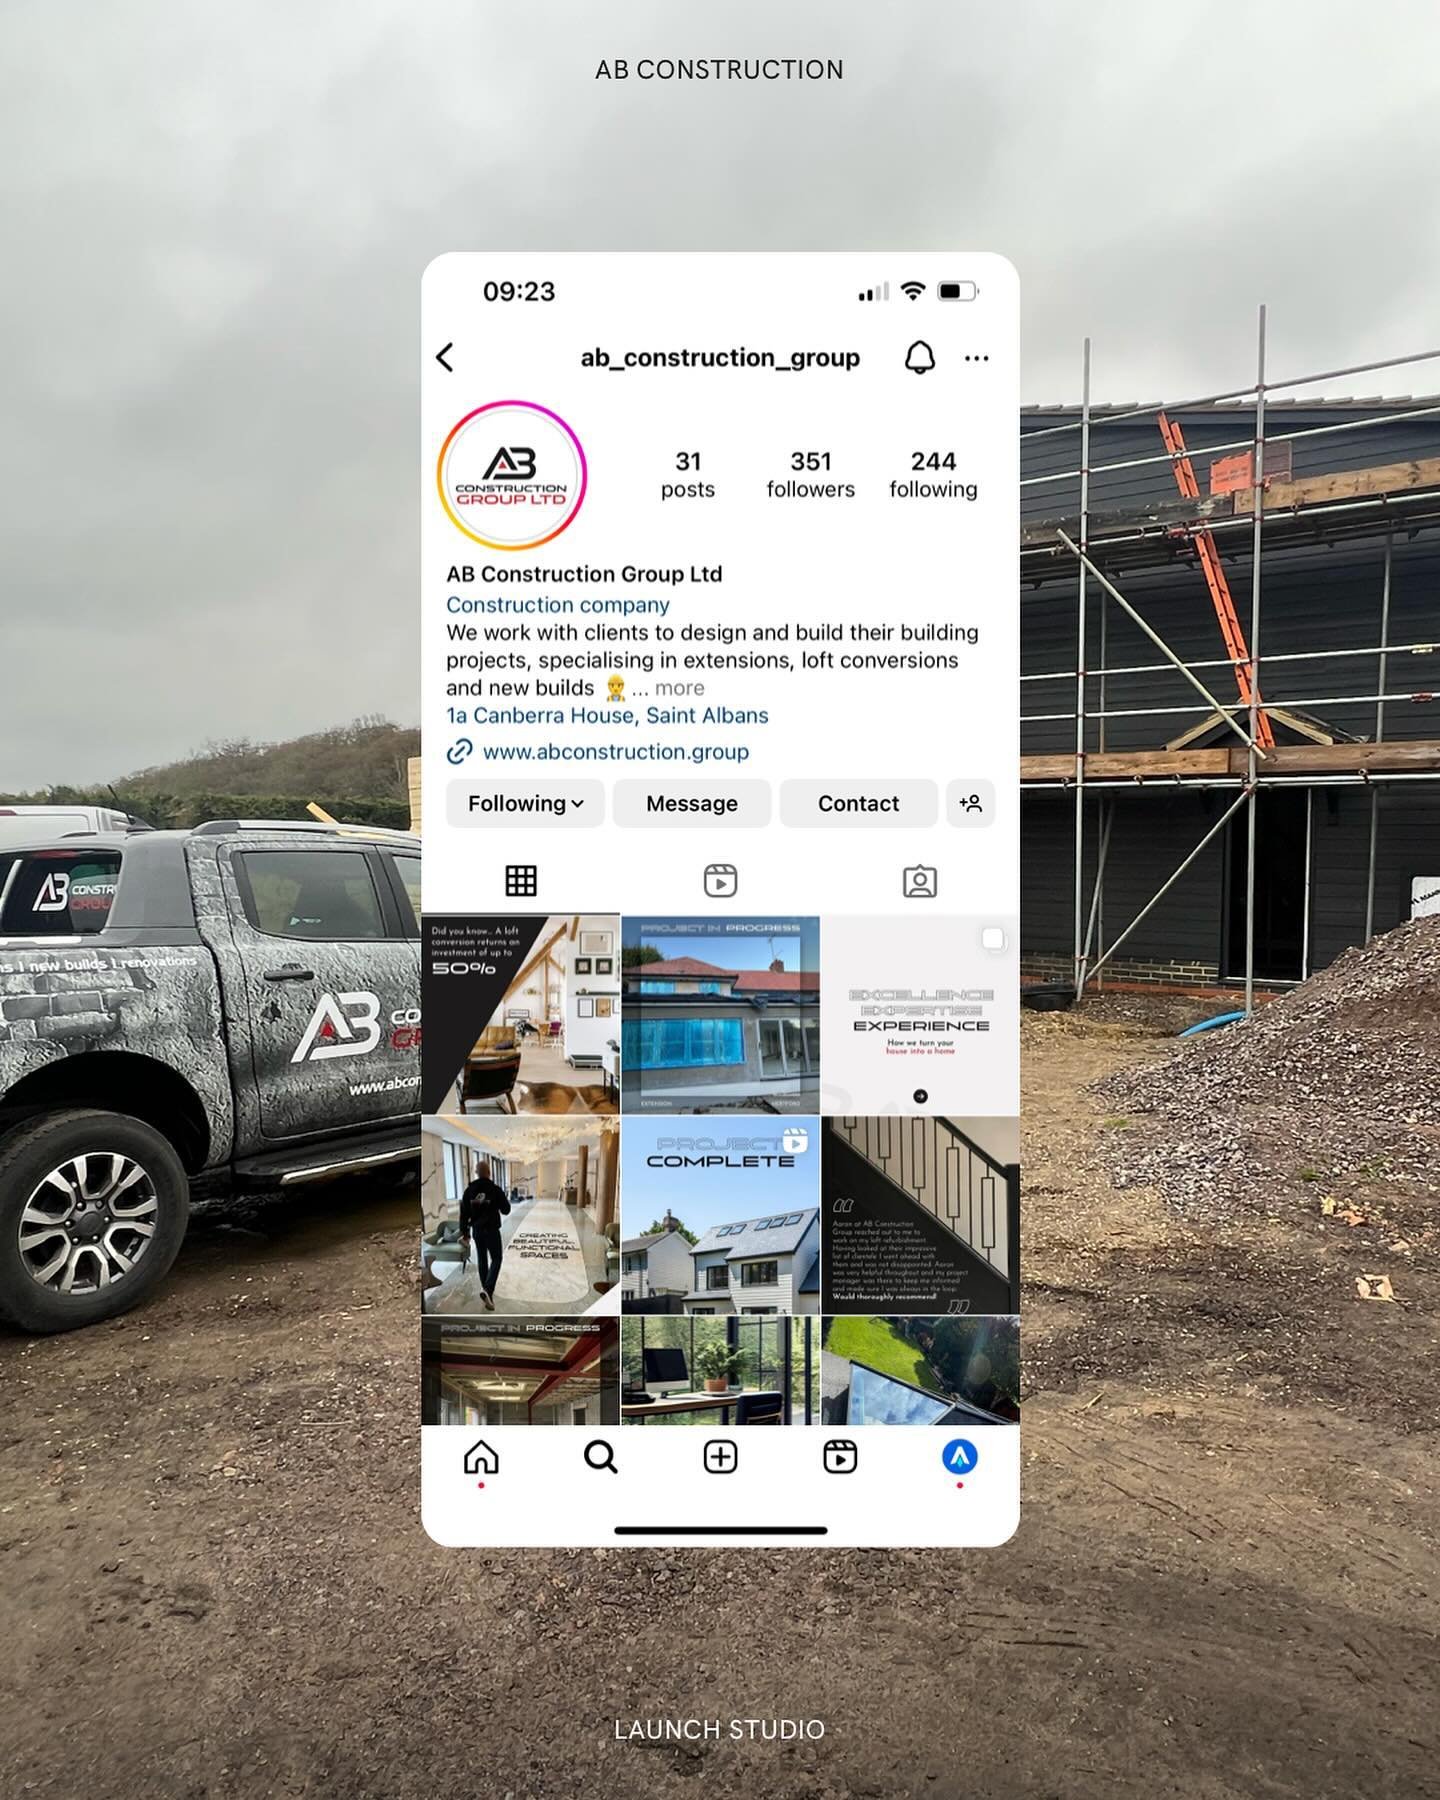 For the last few months we&rsquo;ve been working with Aaron and the team at @ab_construction_group as they start their social media journey; creating engaging content that really shows off what the team can do, improves brand awareness and generates 